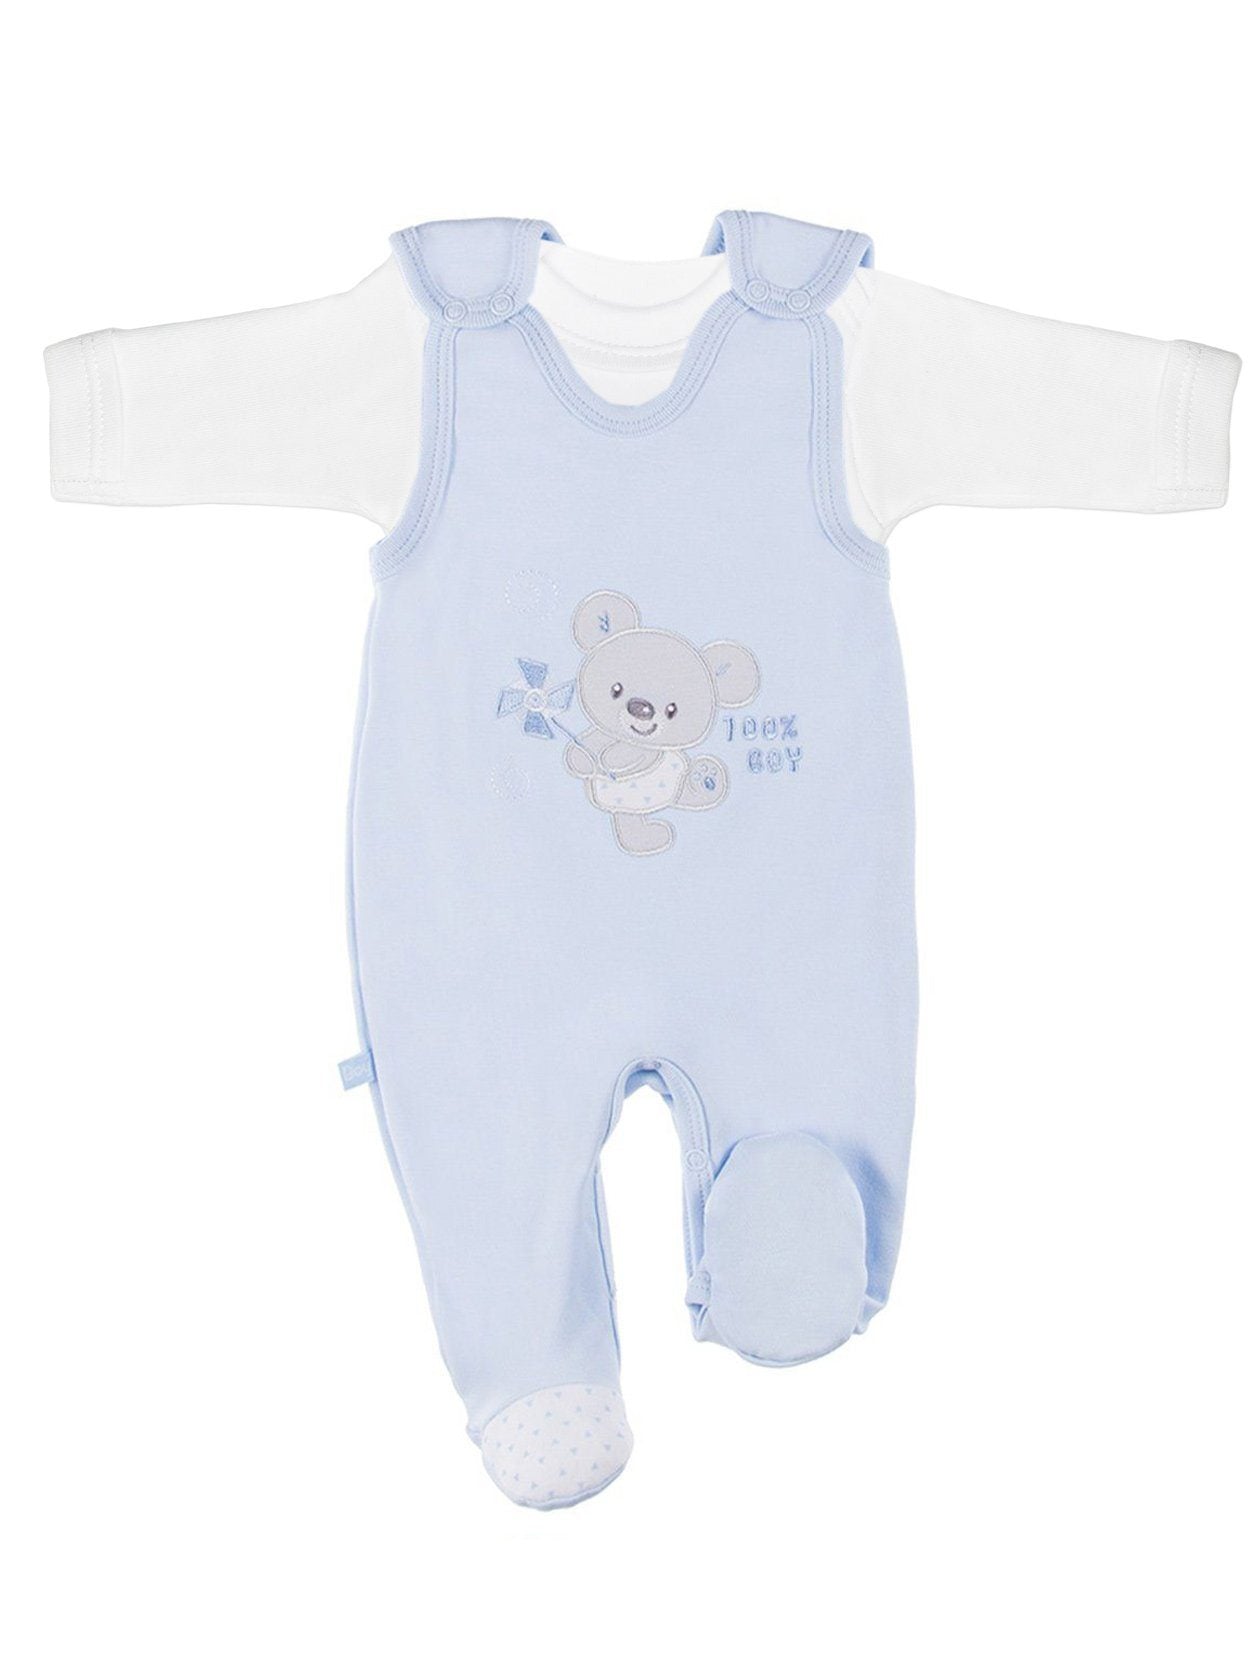 Early Baby Top & Bear Footed Dungarees Set - Blue - Dungaree - EEVI